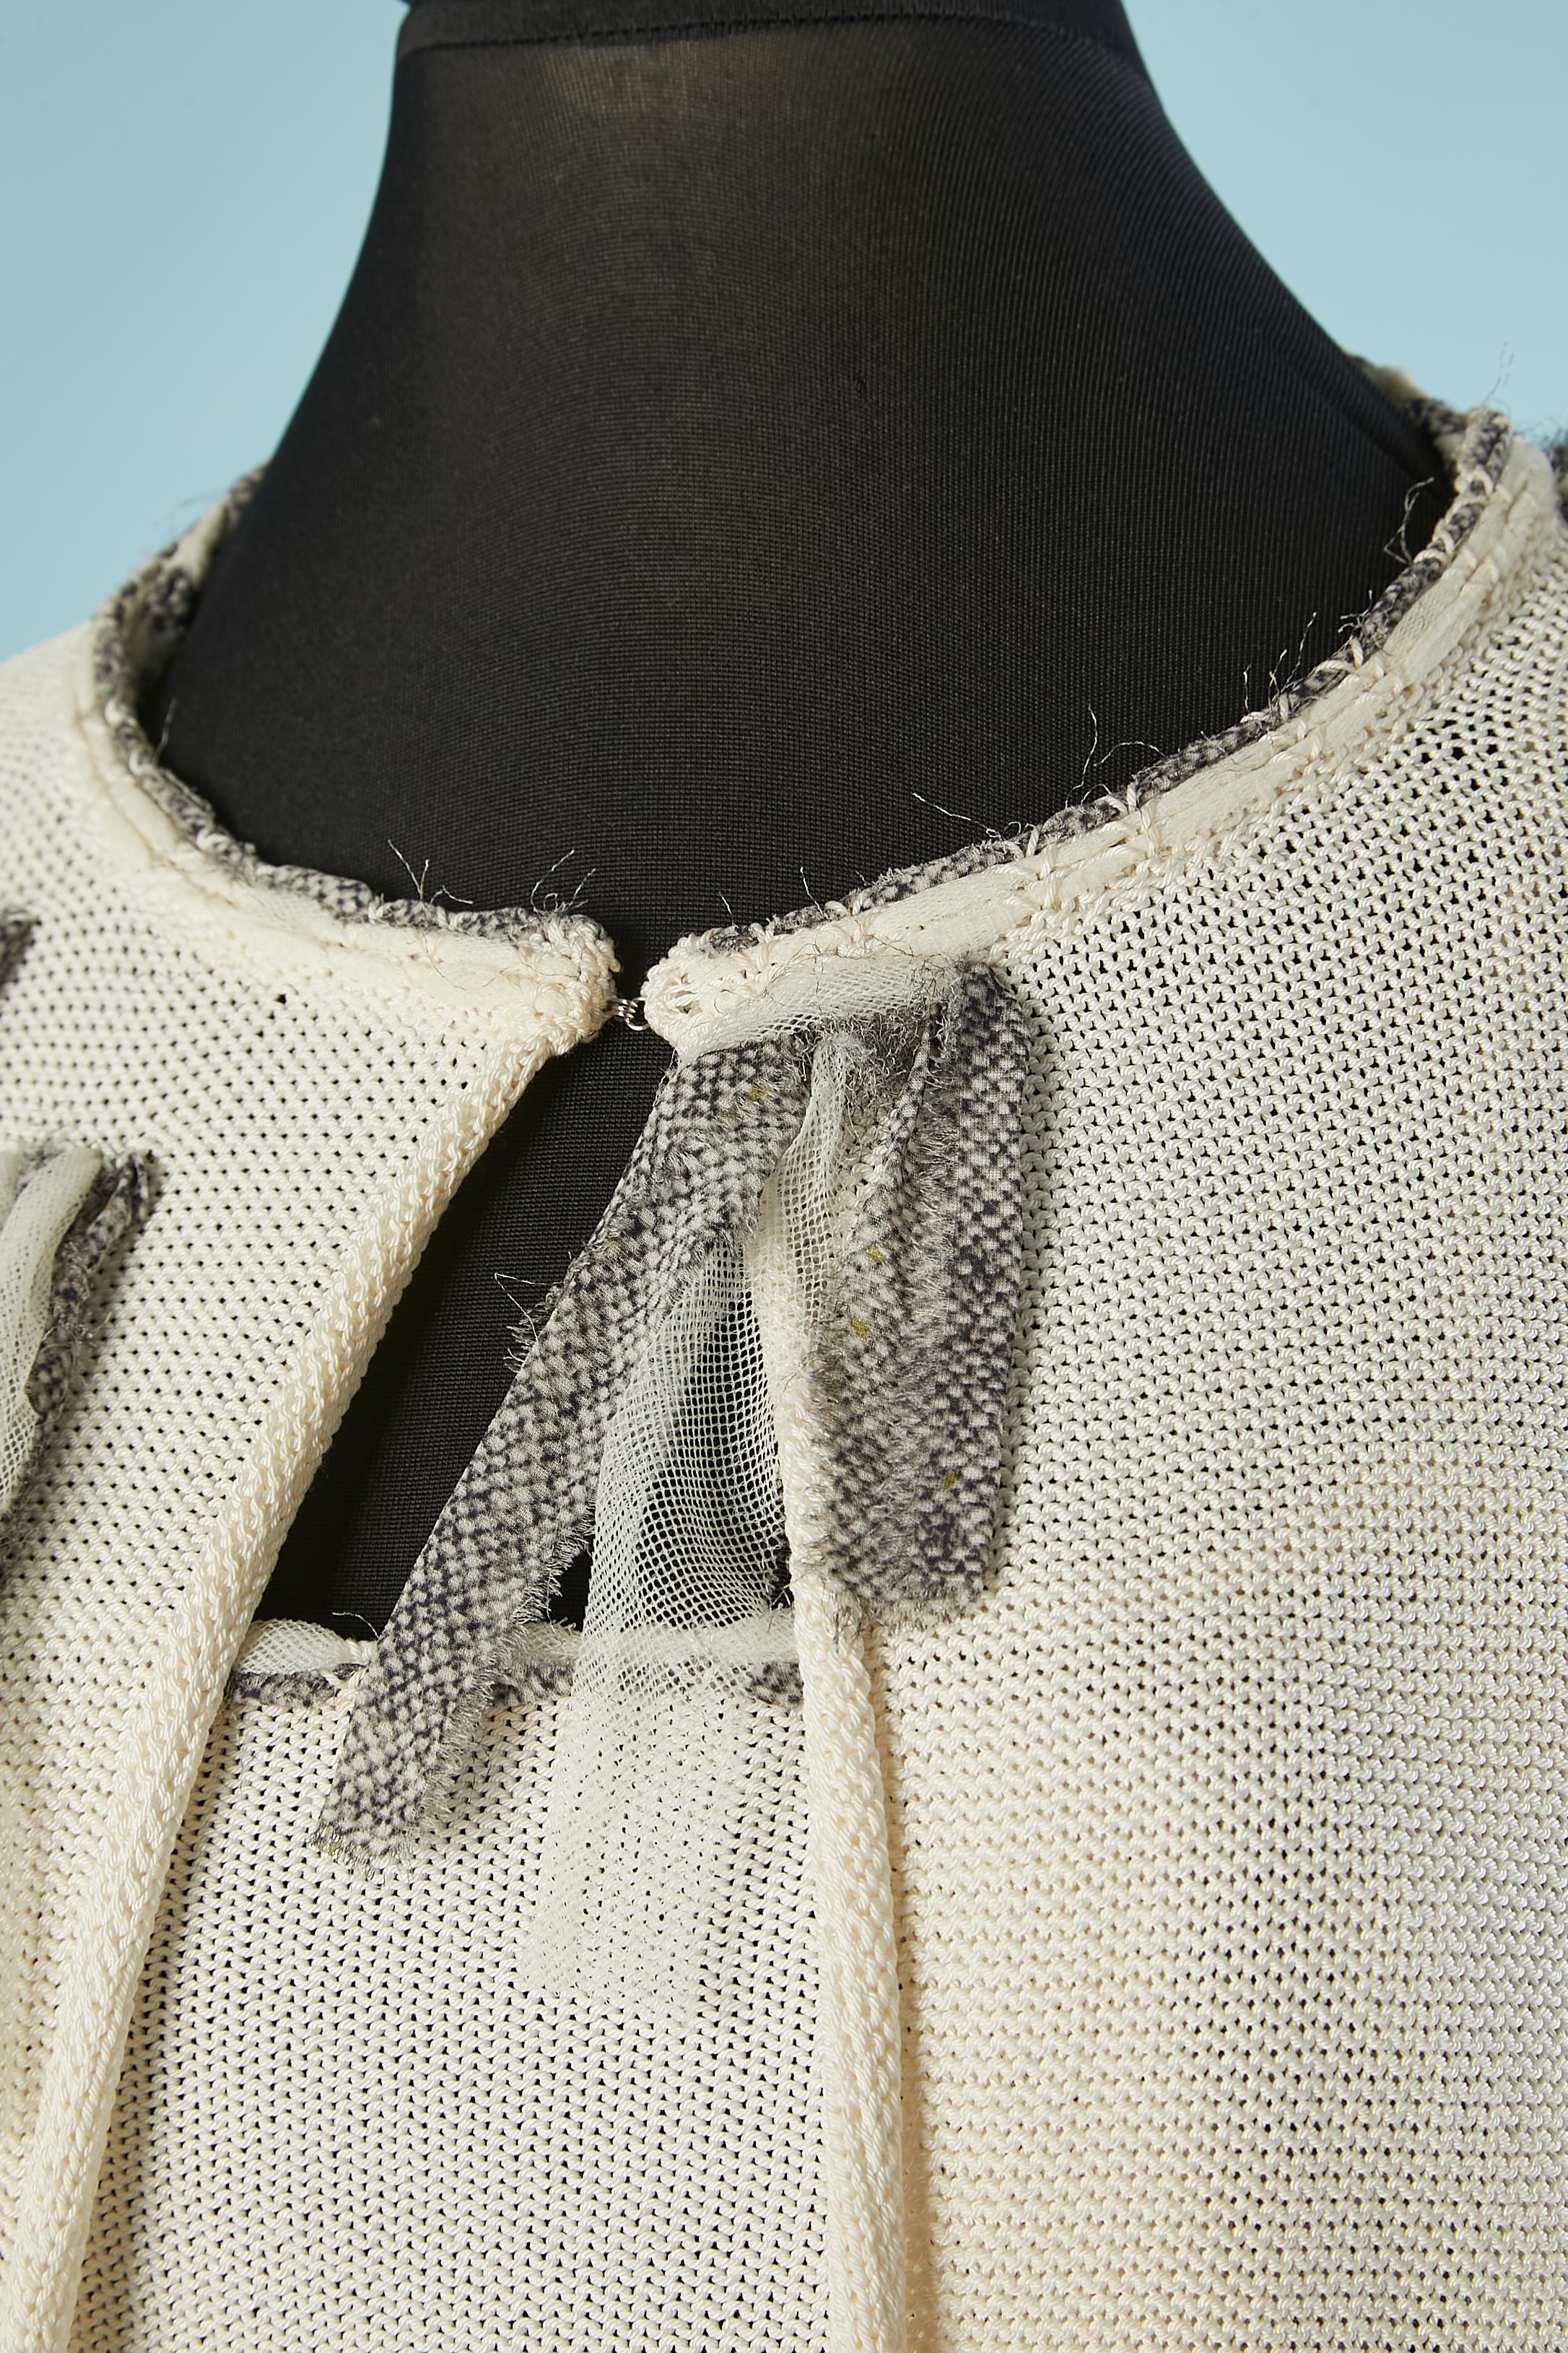 Off-white knit cardigan and bustier ensemble . Fabric composition: 54% rayon, 41% cotton, 2,5% silk, 2,5% nylon. Fringes of printed chiffon and tulle embellishement. 
One hook&eye in the middle top of the cardigan. Braid made of chiffon and tulle on